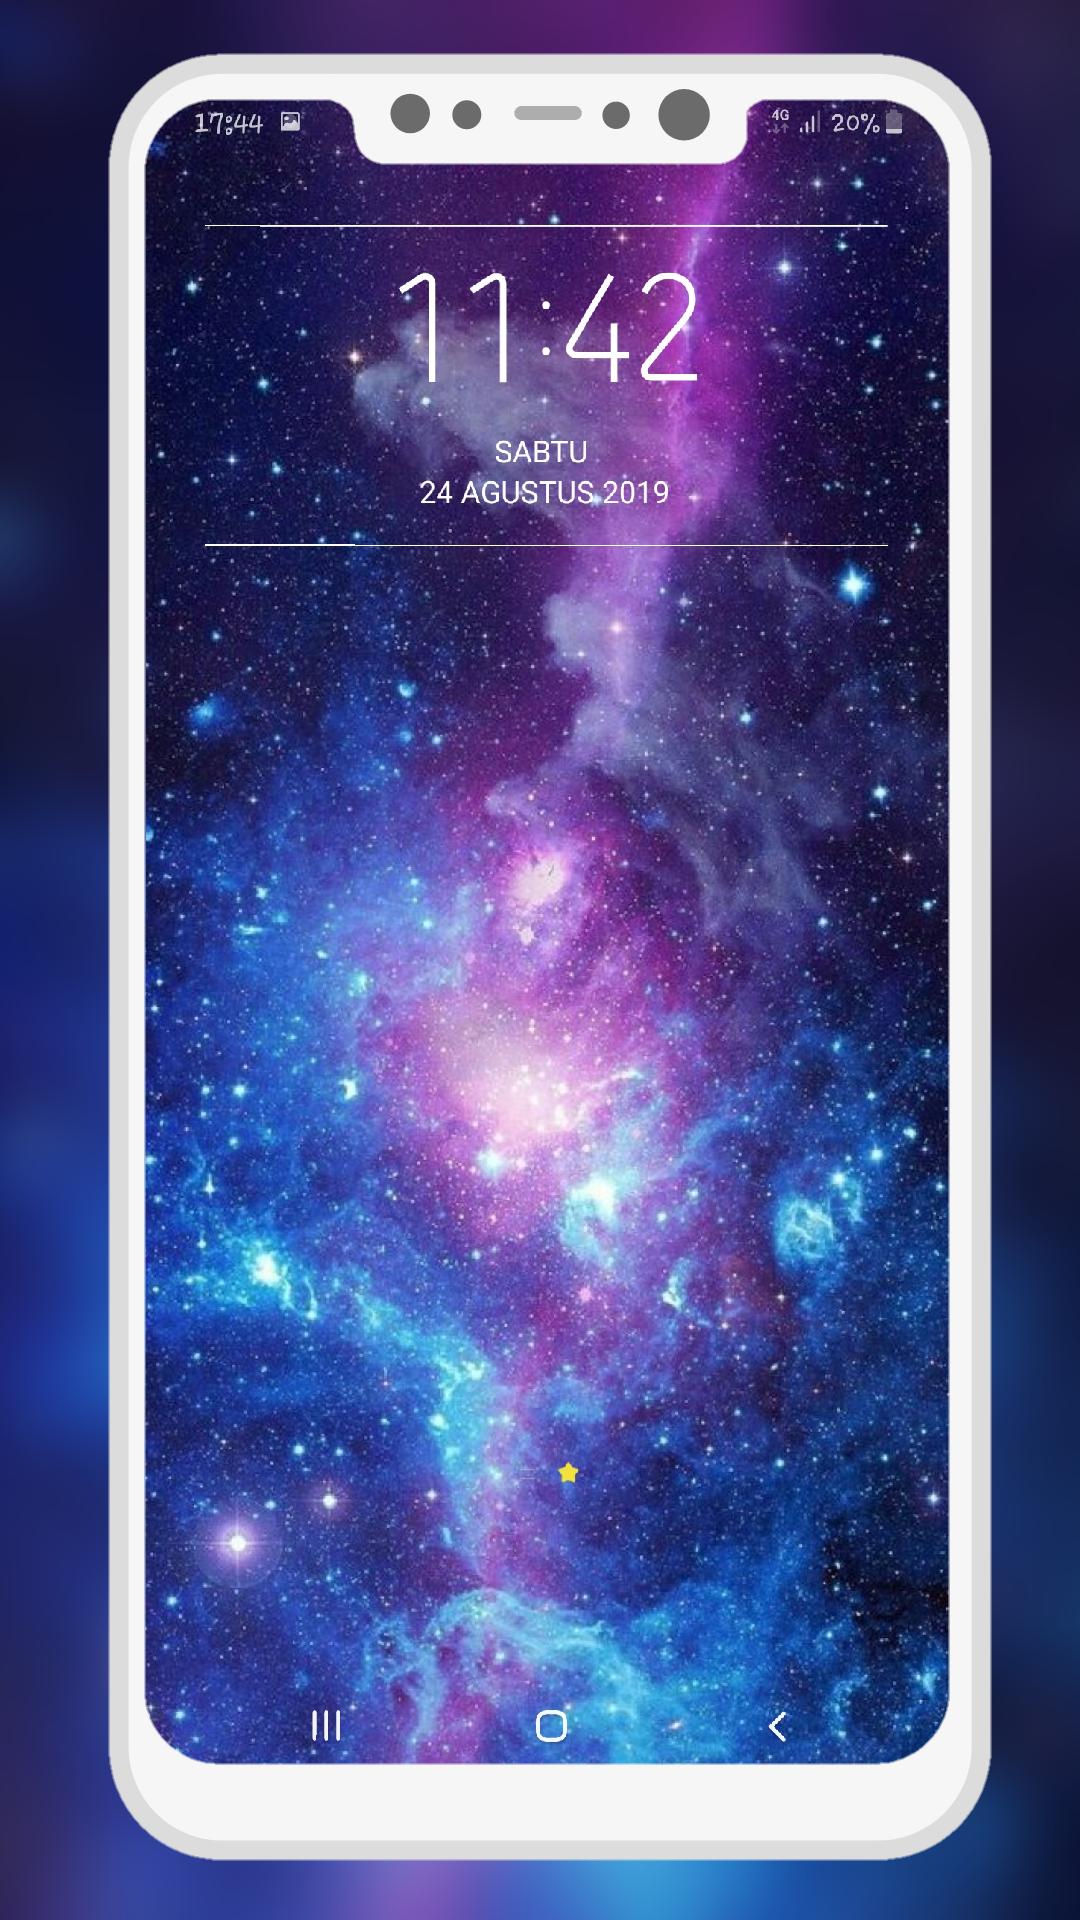 Galaxy Wallpaper Android Download, Best Wallpaper Android - Beautiful Best Wallpaper Galaxy , HD Wallpaper & Backgrounds